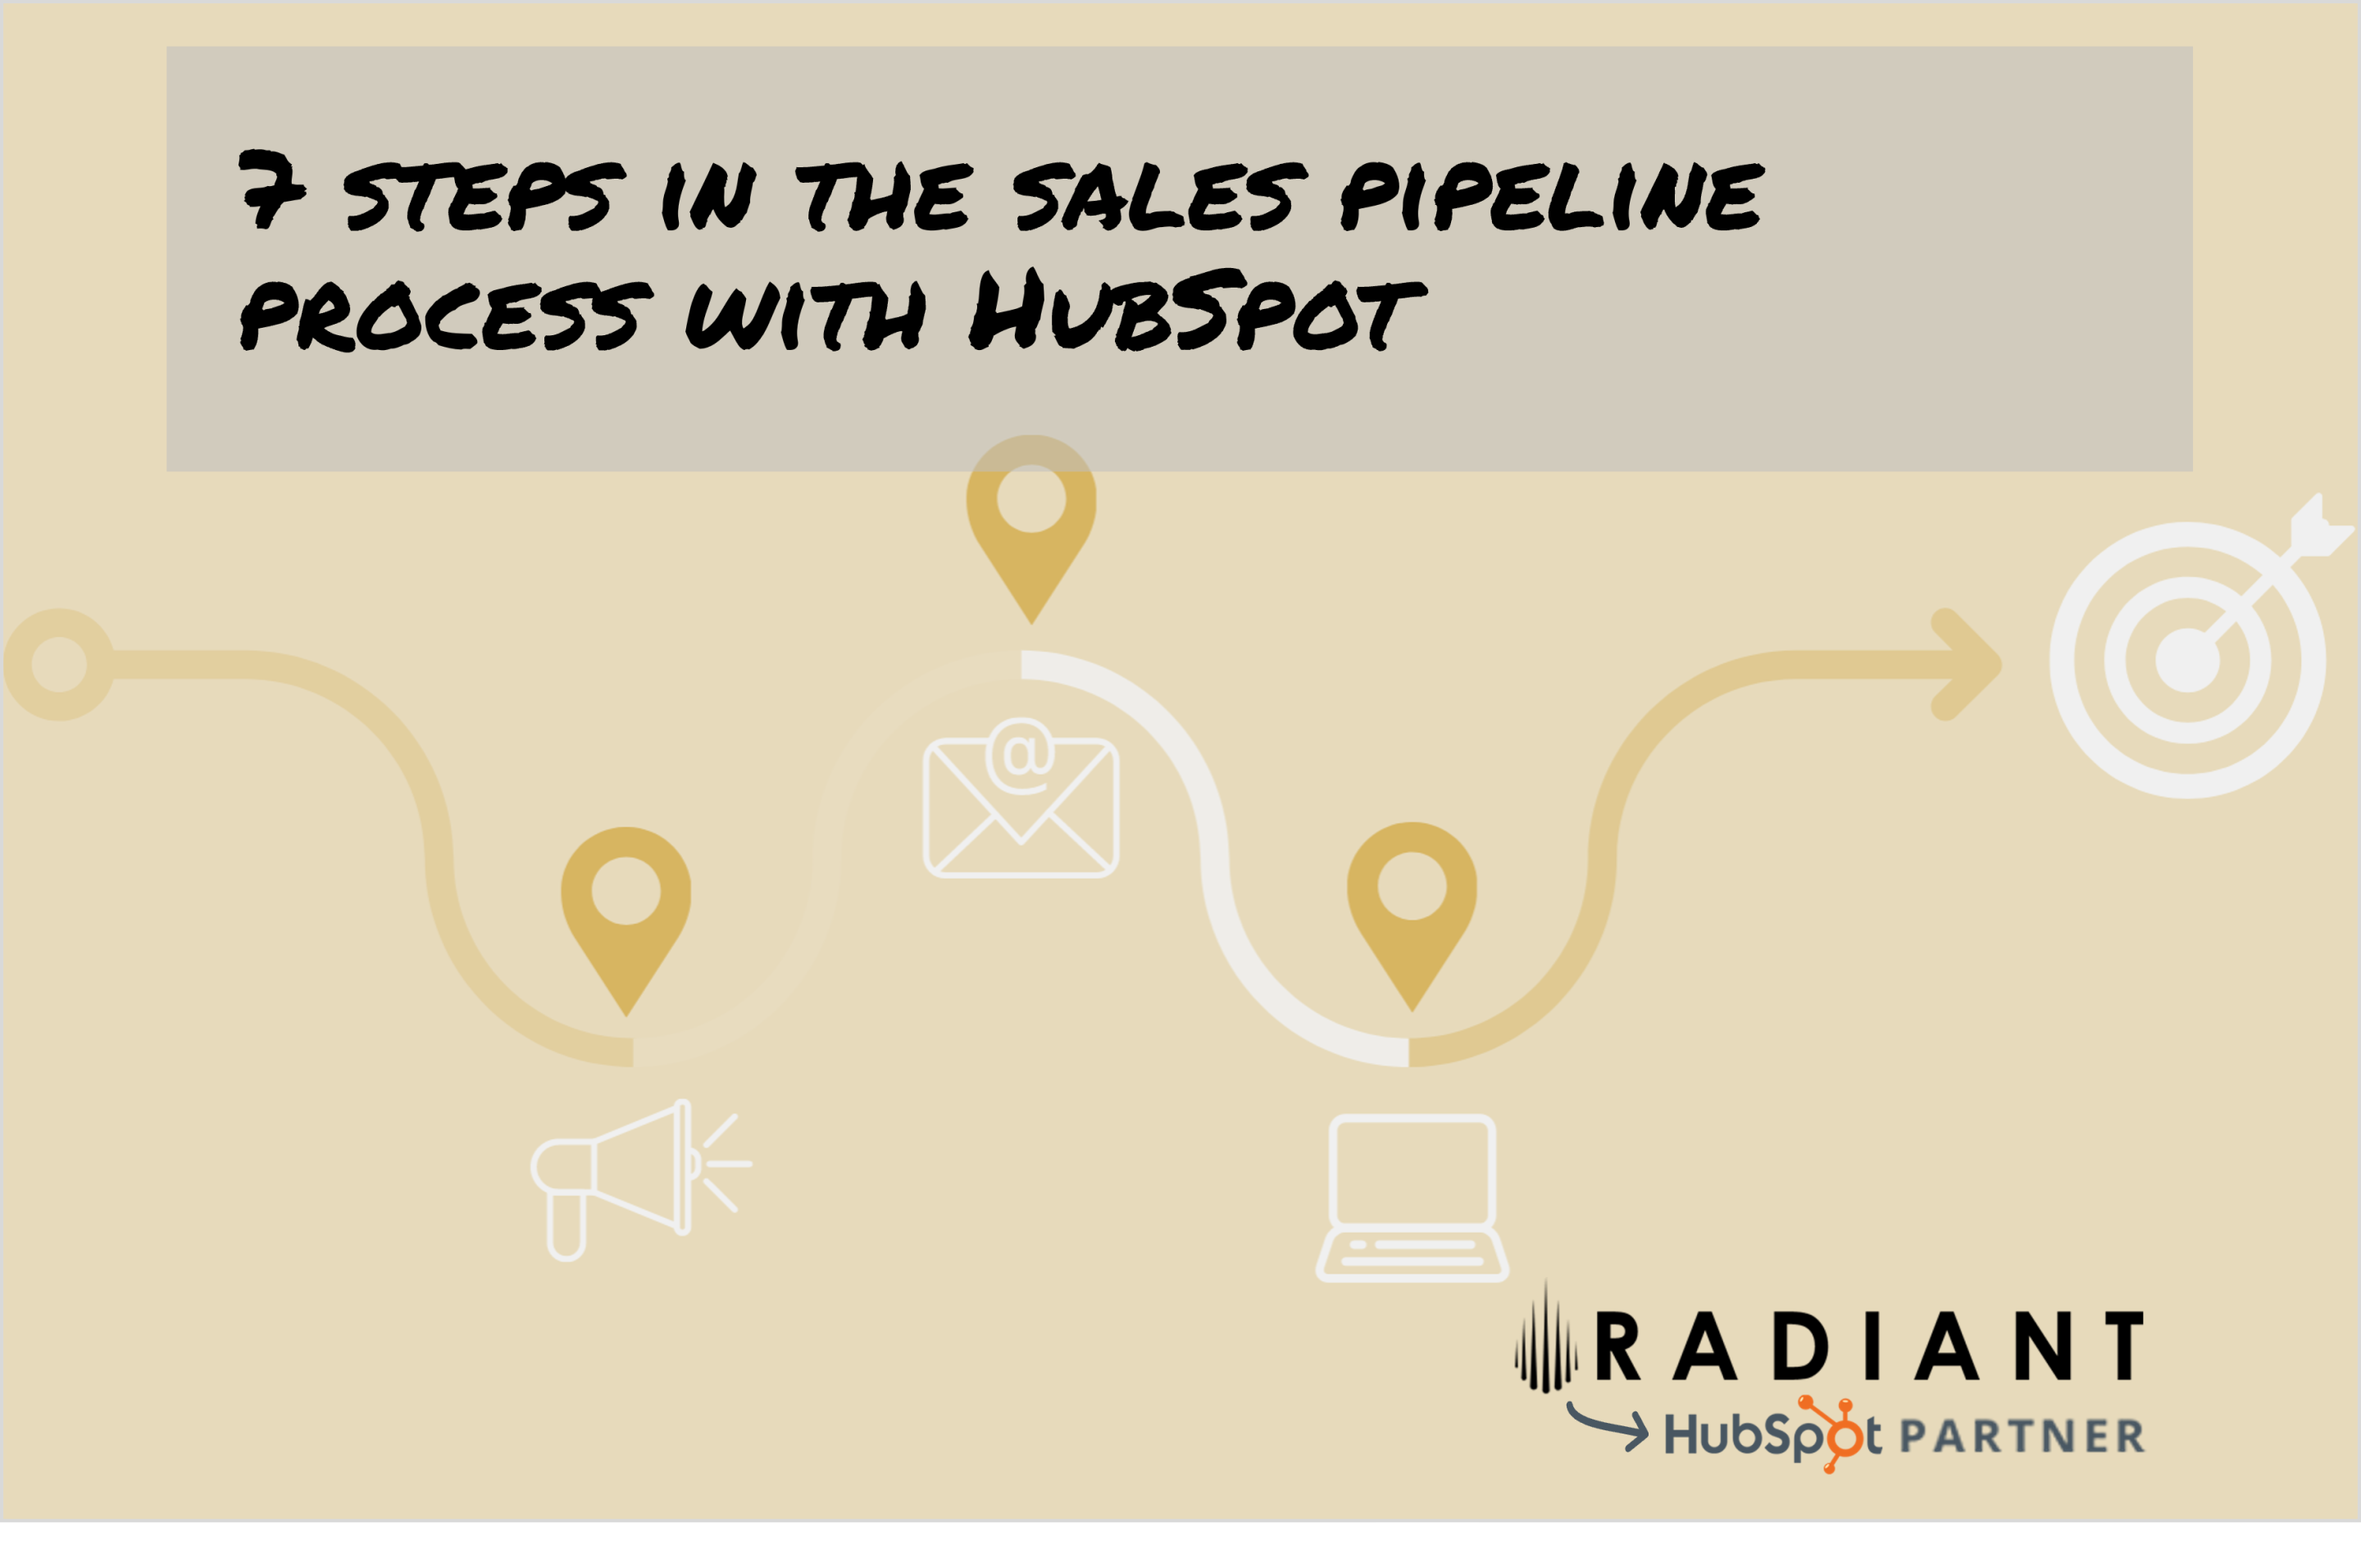 In this article, we'll show you the 7 steps in the sales pipeline process with HubSpot. Learn from HubSpot Platinum Partner Radiant.